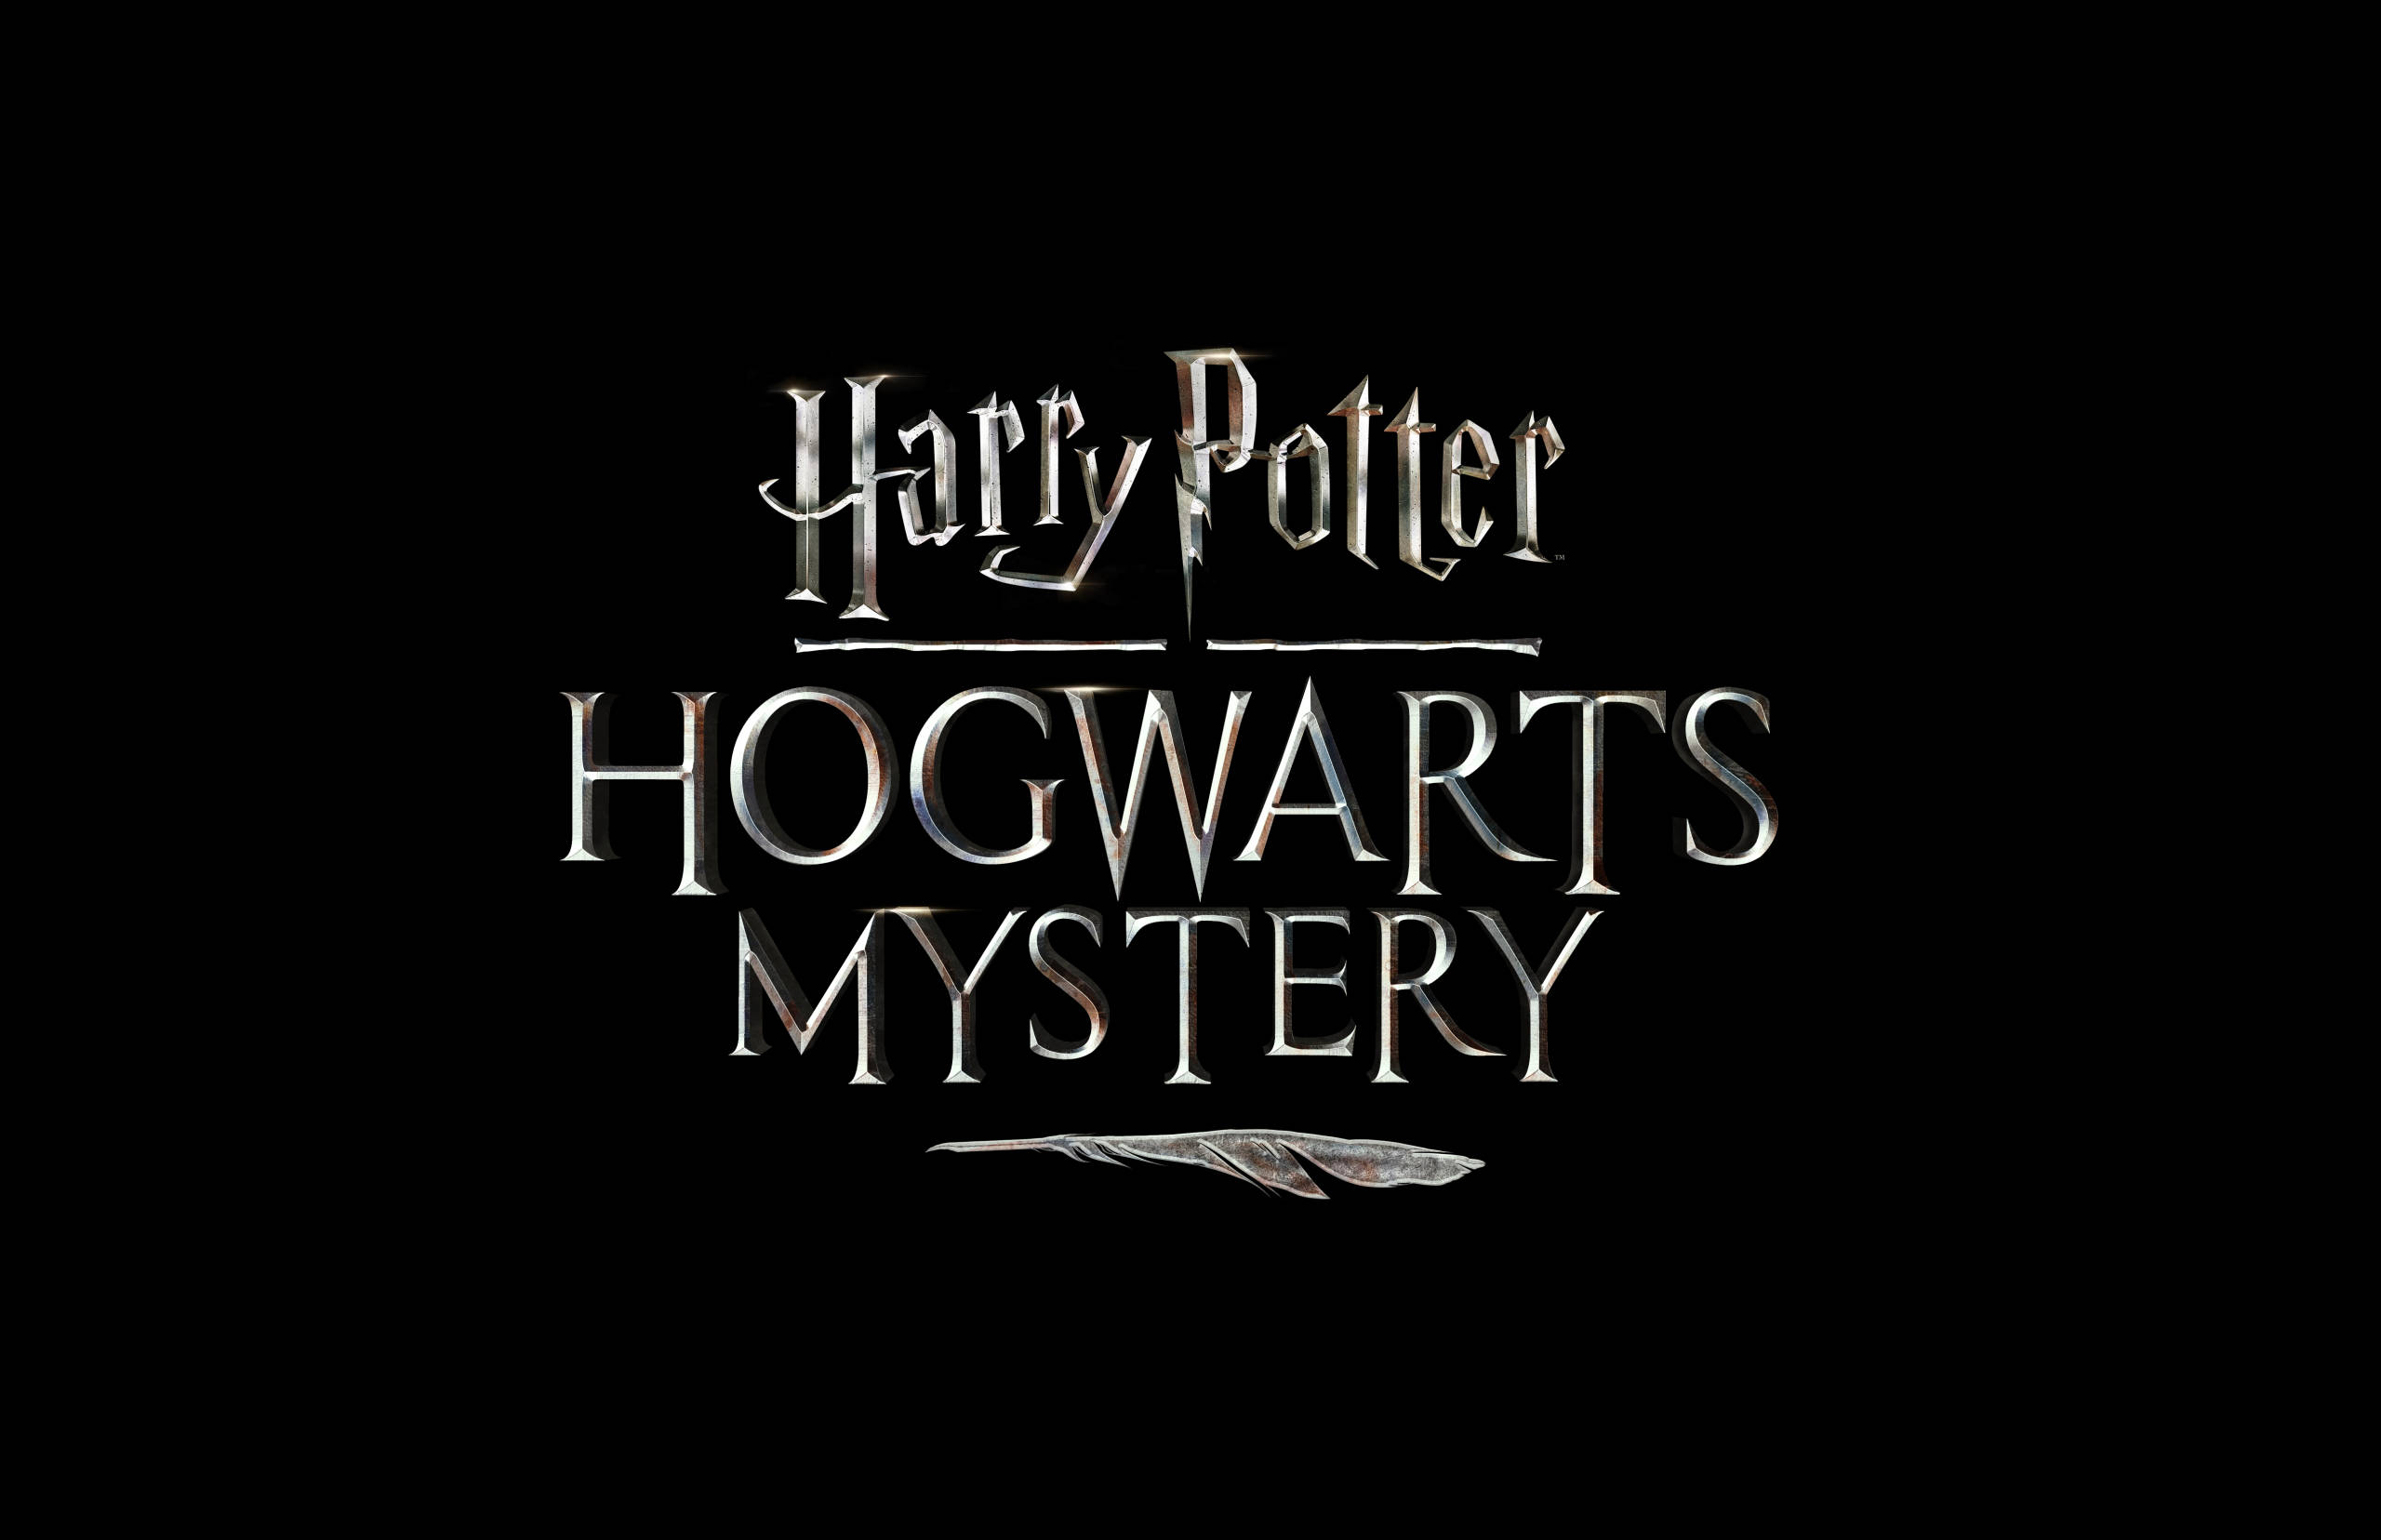 Title image for Harry Potter: Hogwarts Mystery on Portkey games